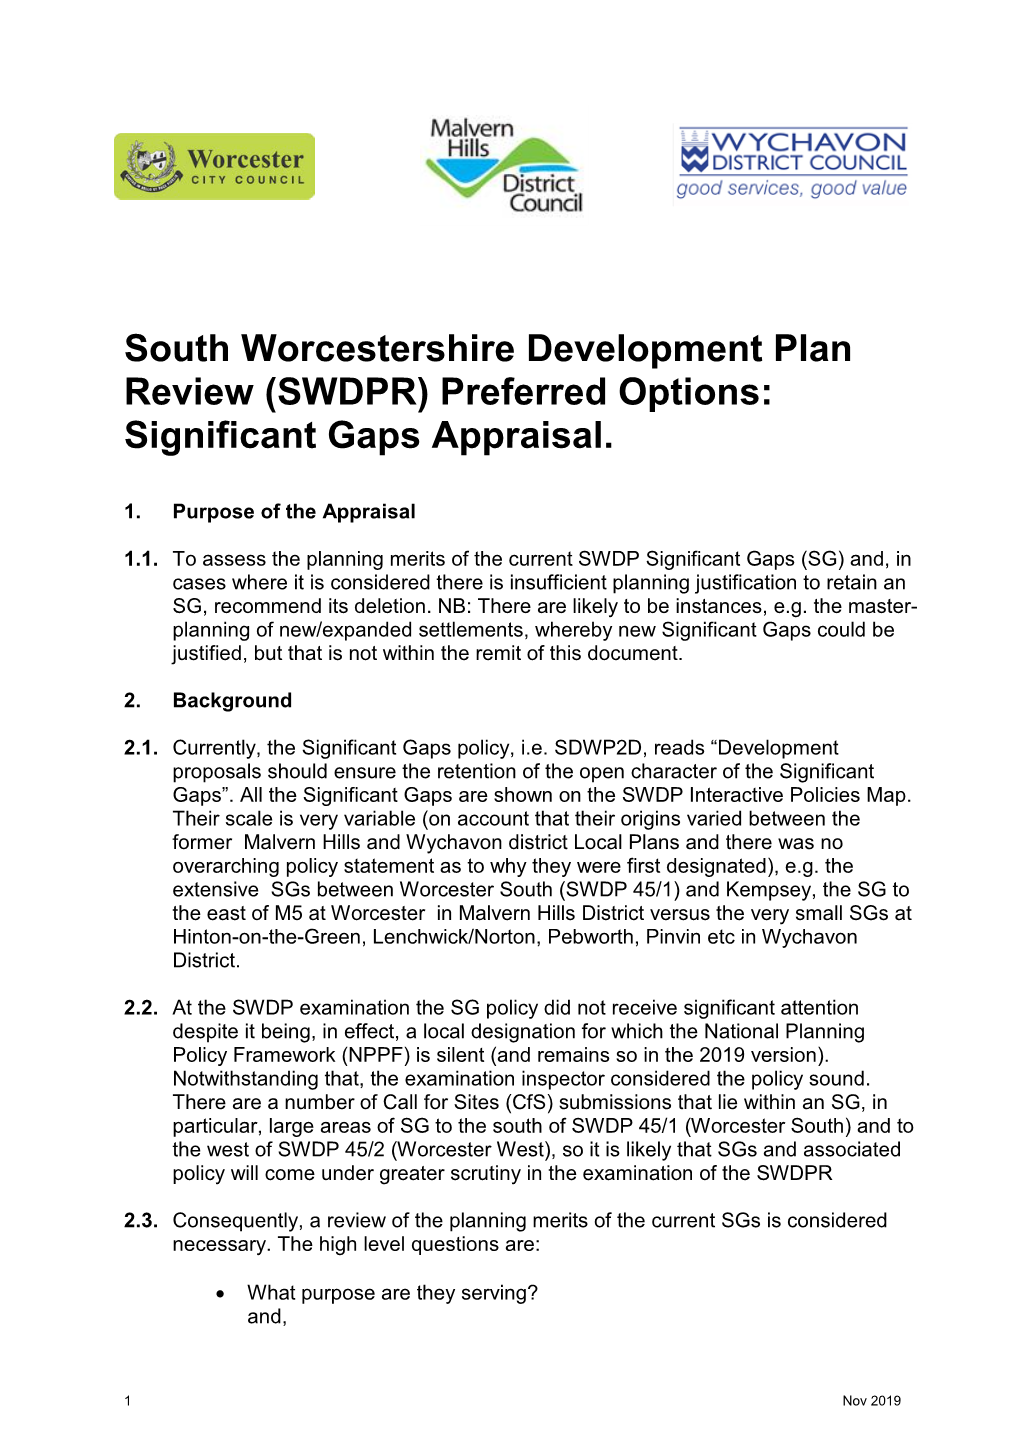 South Worcestershire Development Plan Review (SWDPR) Preferred Options: Significant Gaps Appraisal